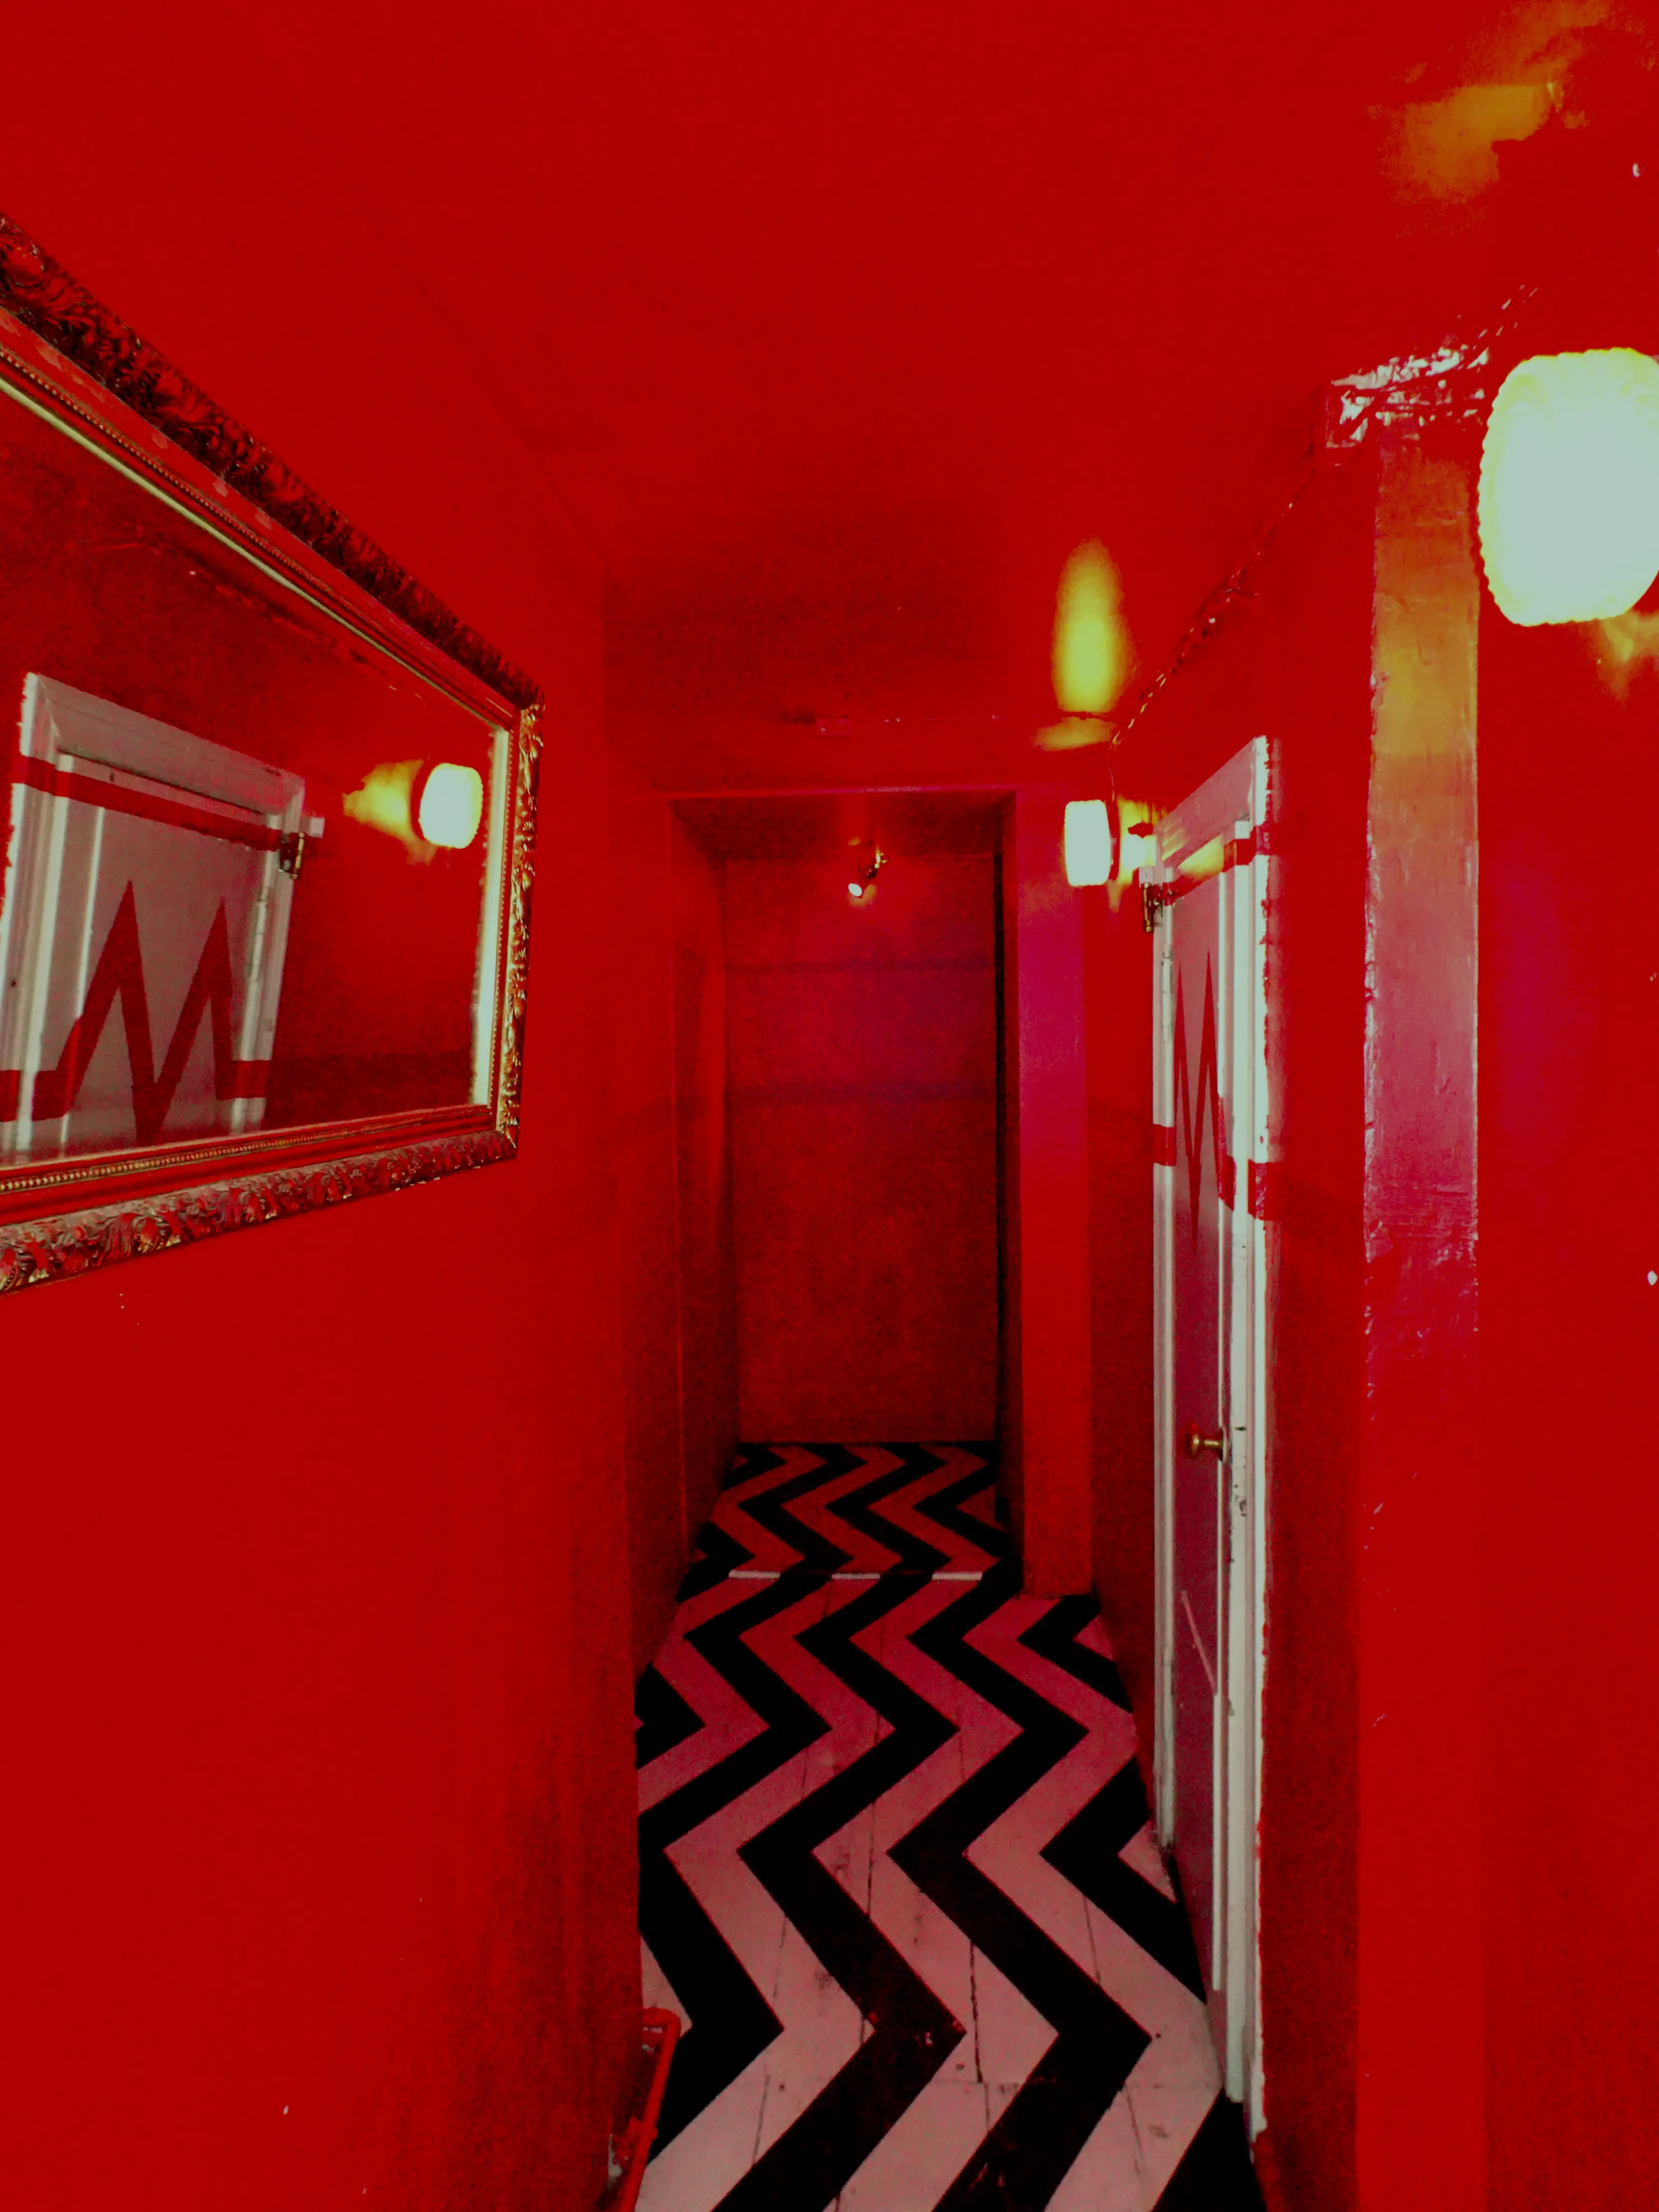 A red-walled corridor with a white-and-black zig-zagging pattern on the floor